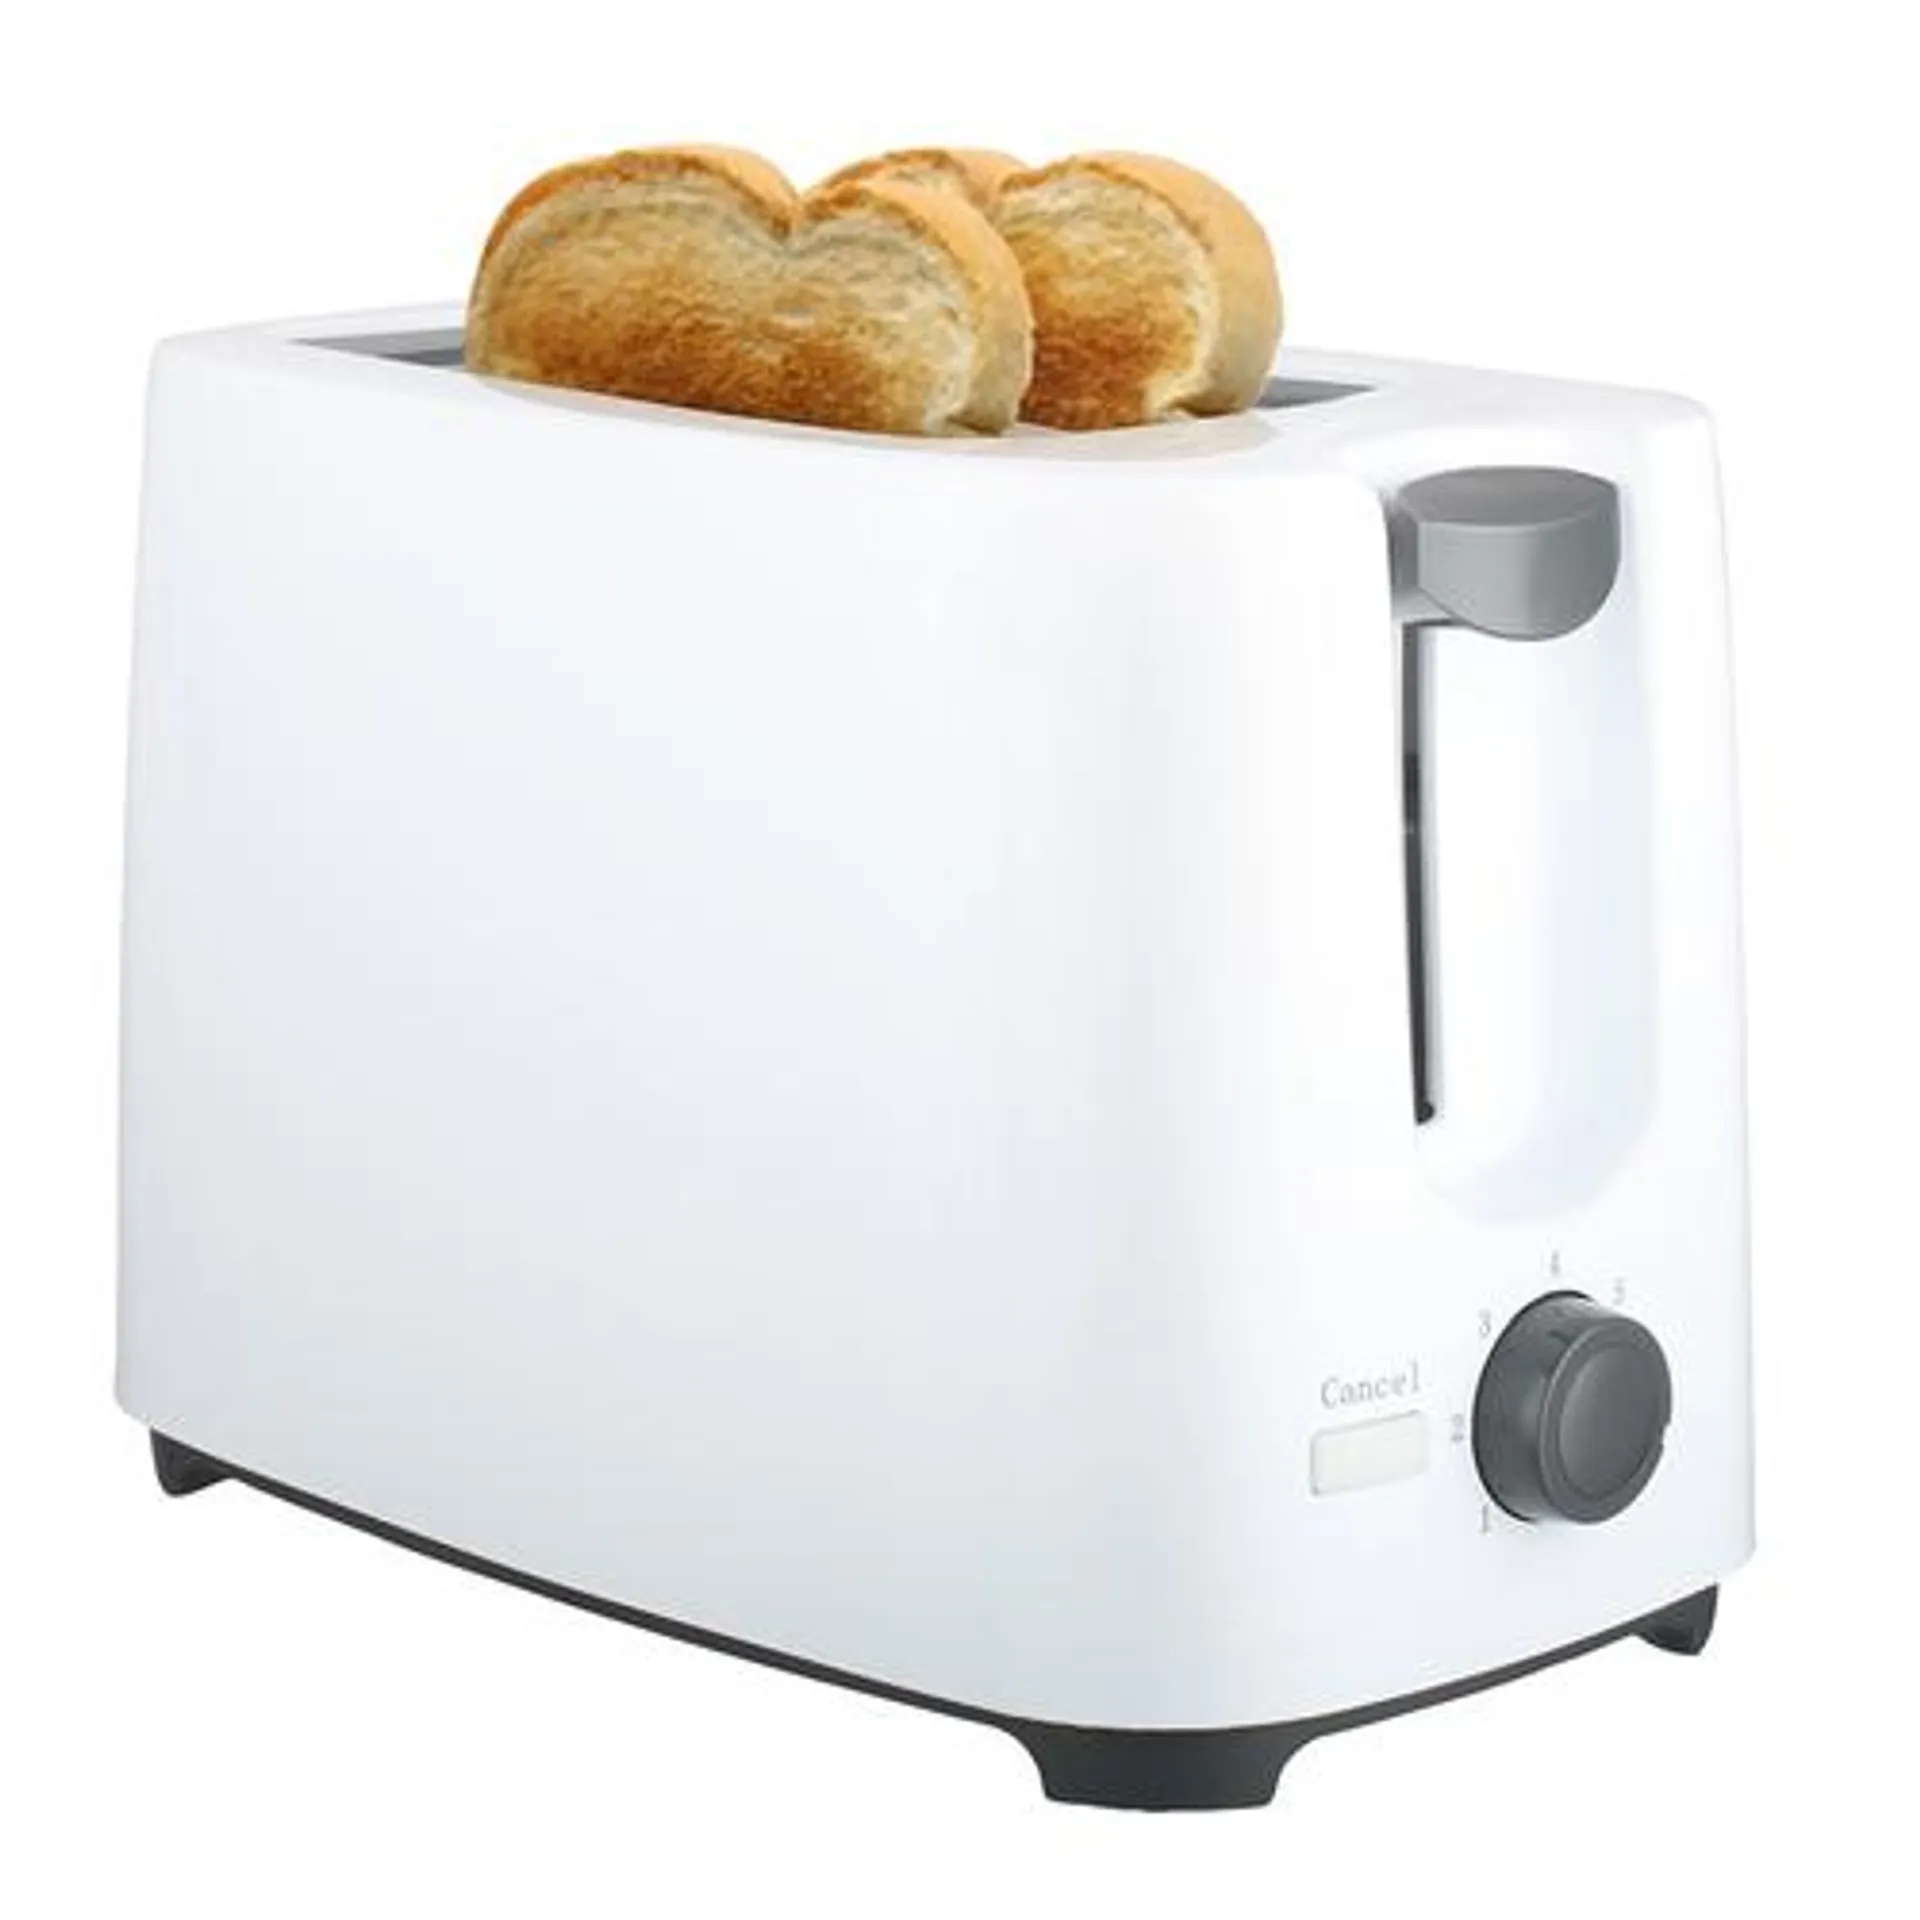 2-Slice Toaster with 7 Shades Knob and Anti-Jam Protection in White